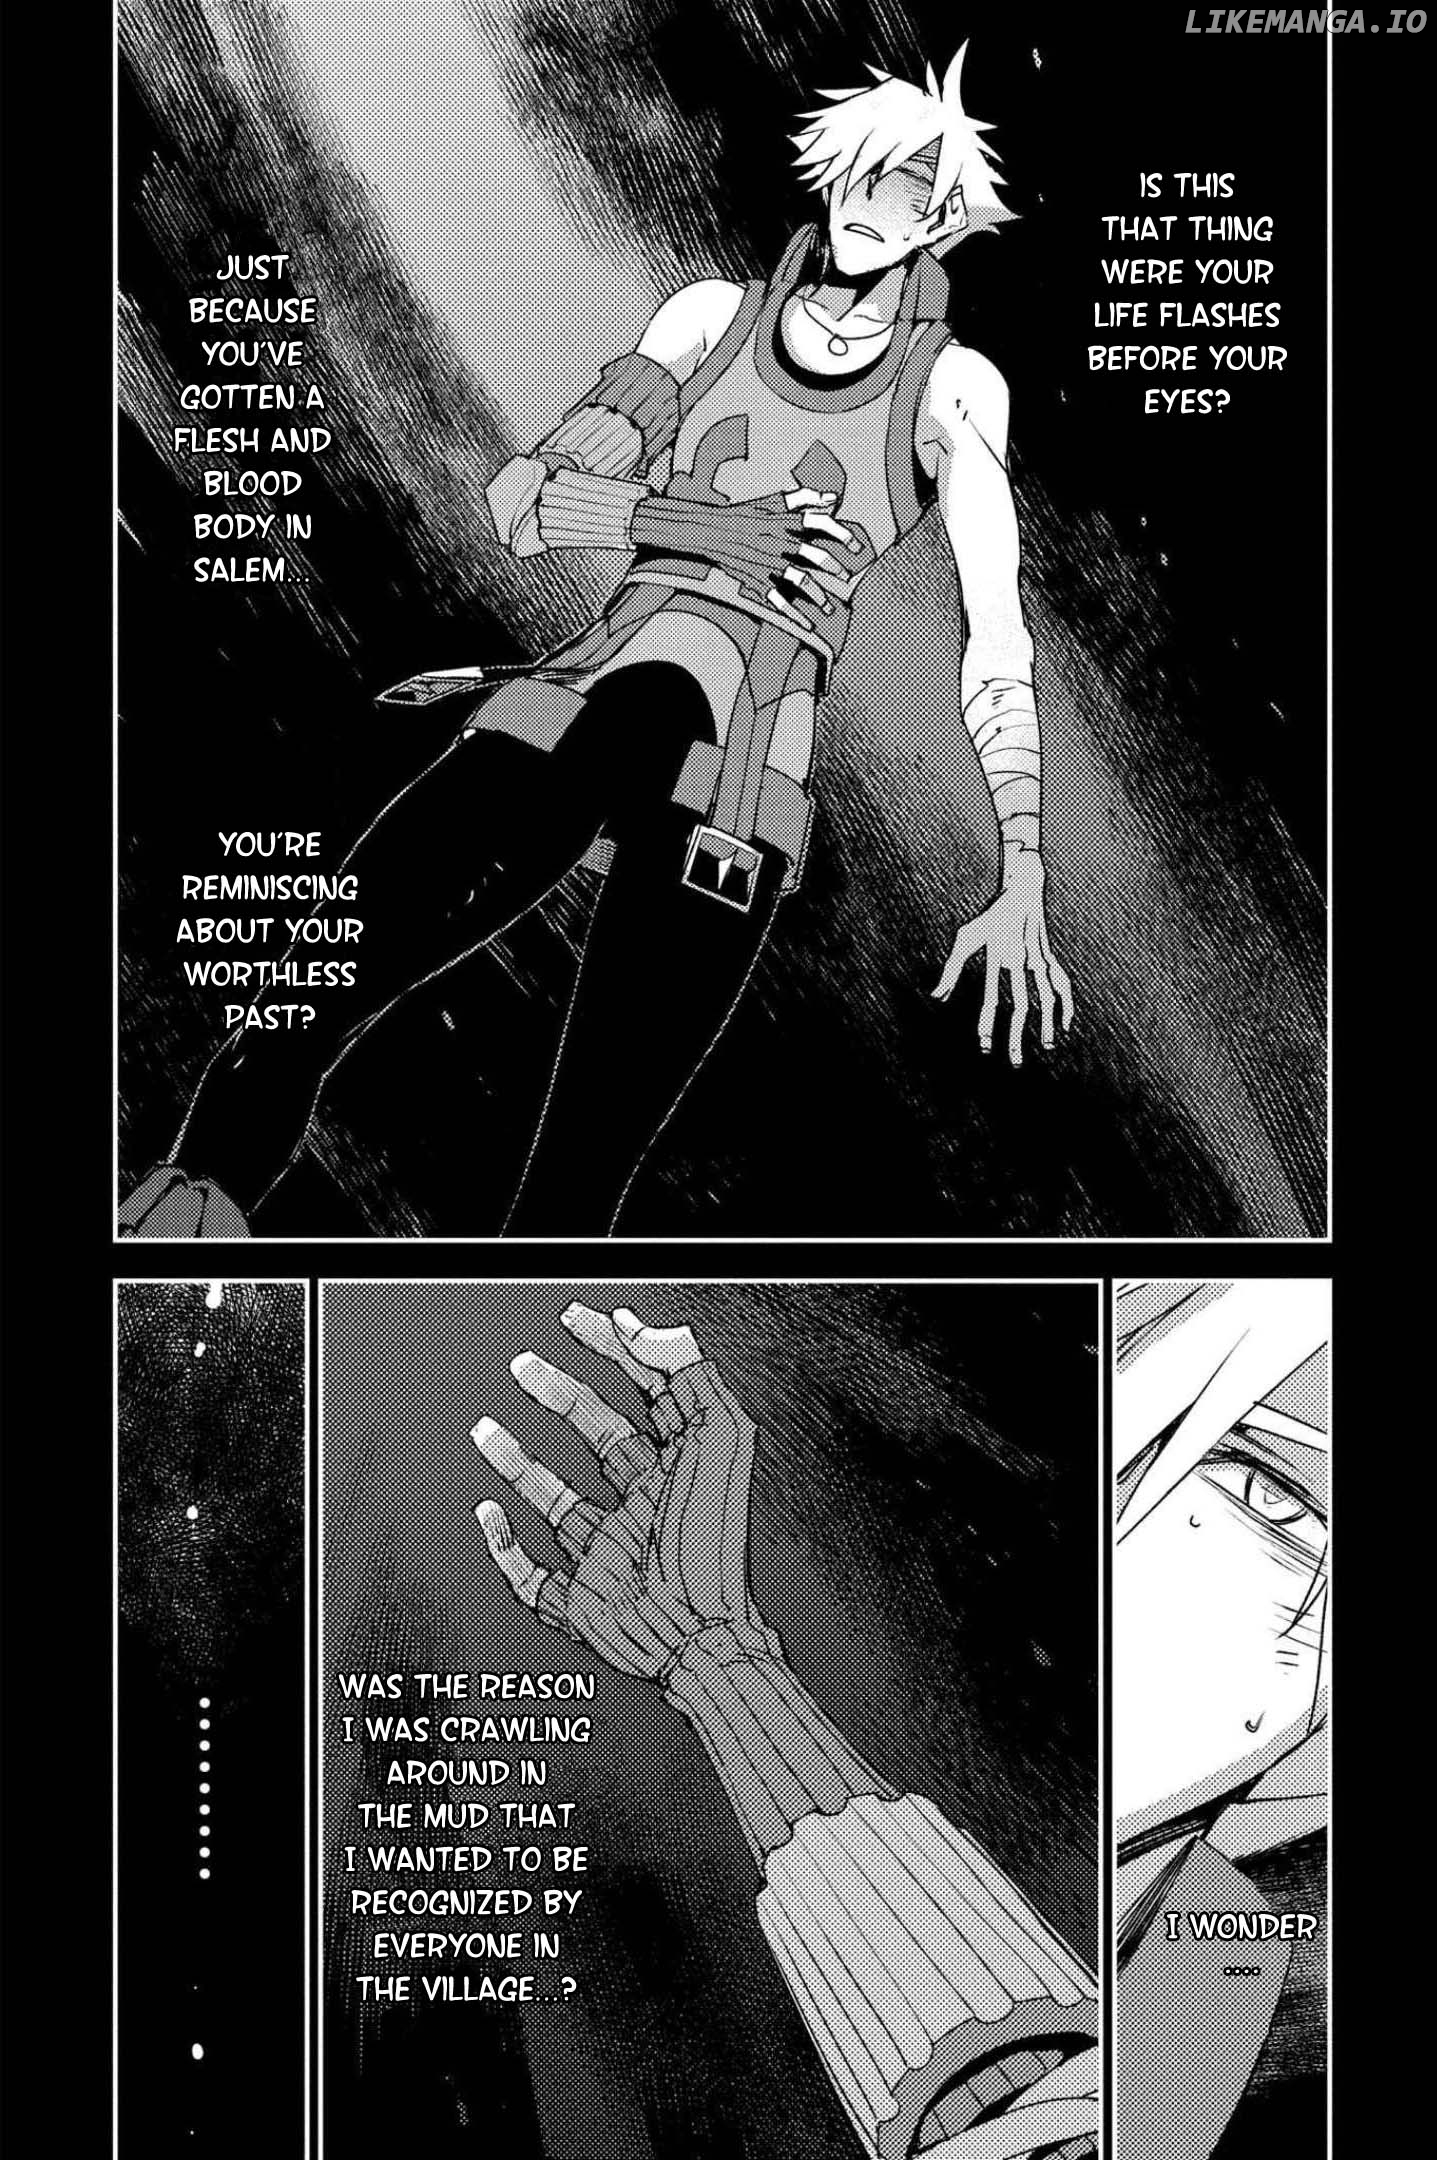 Fate/Grand Order: Epic of Remnant - Subspecies Singularity IV: Taboo Advent Salem: Salem of Heresy Chapter 25 - page 5